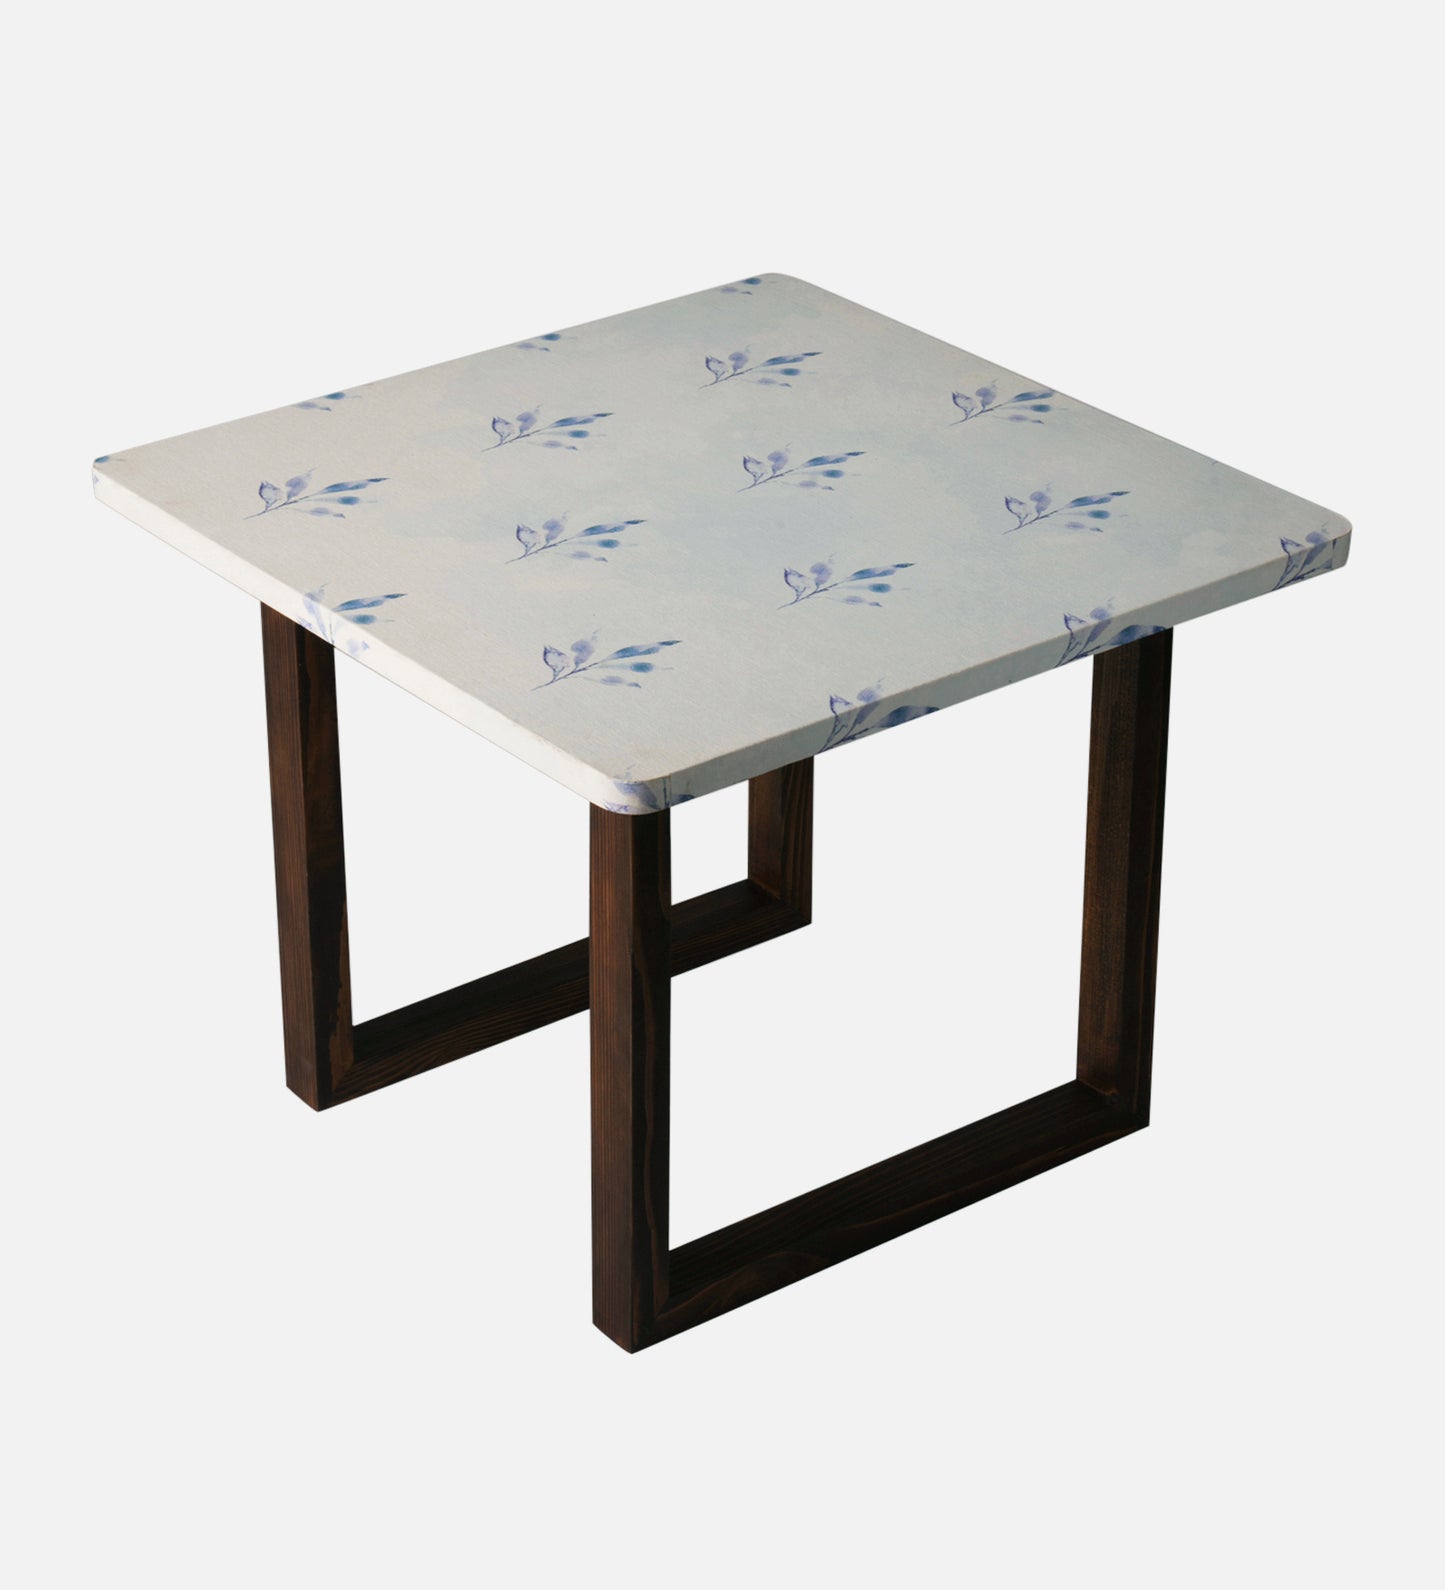 Tiny Twigs Square Coffee Tables, Wooden Tables, Coffee Tables, Center Tables, Living Room Decor by A Tiny Mistake